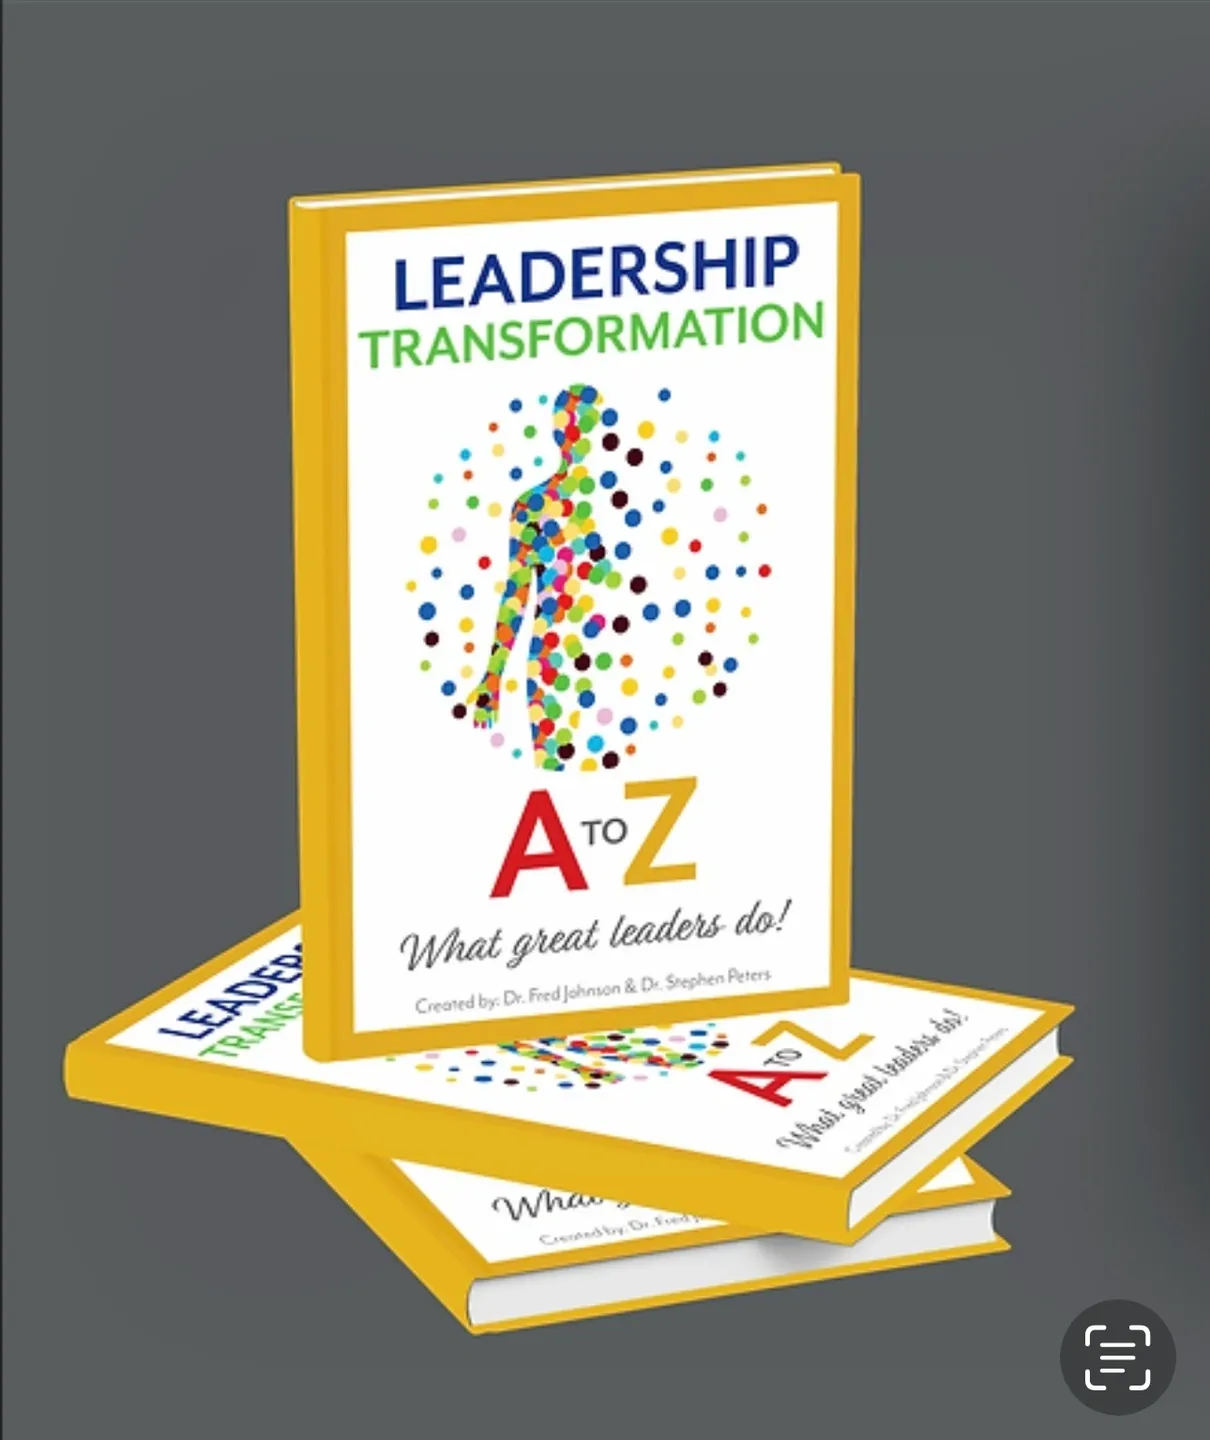 A stack of books with the words leadership transformation on them.